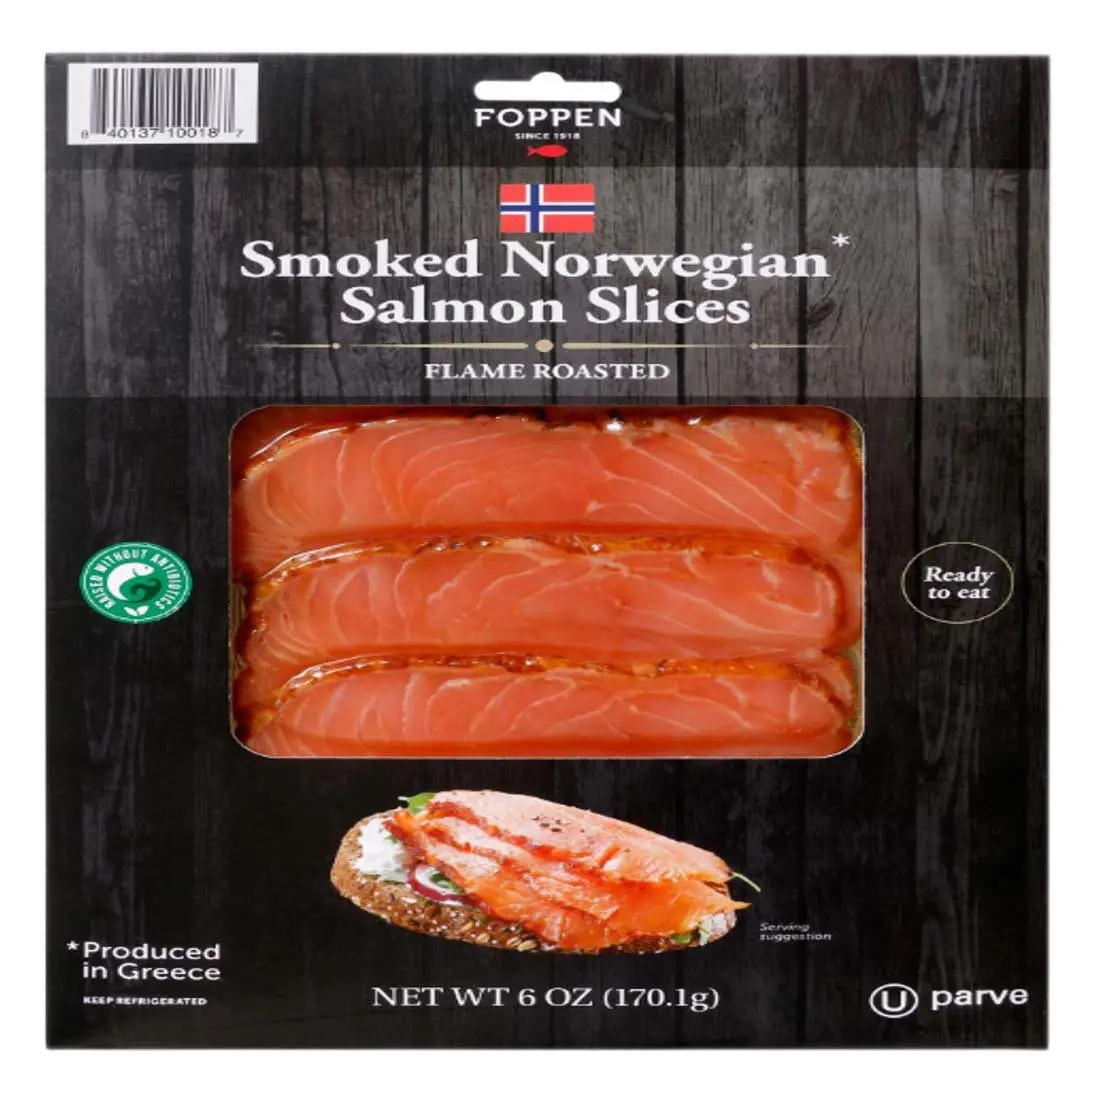 foppen smoked salmon - How long is foppen salmon good for